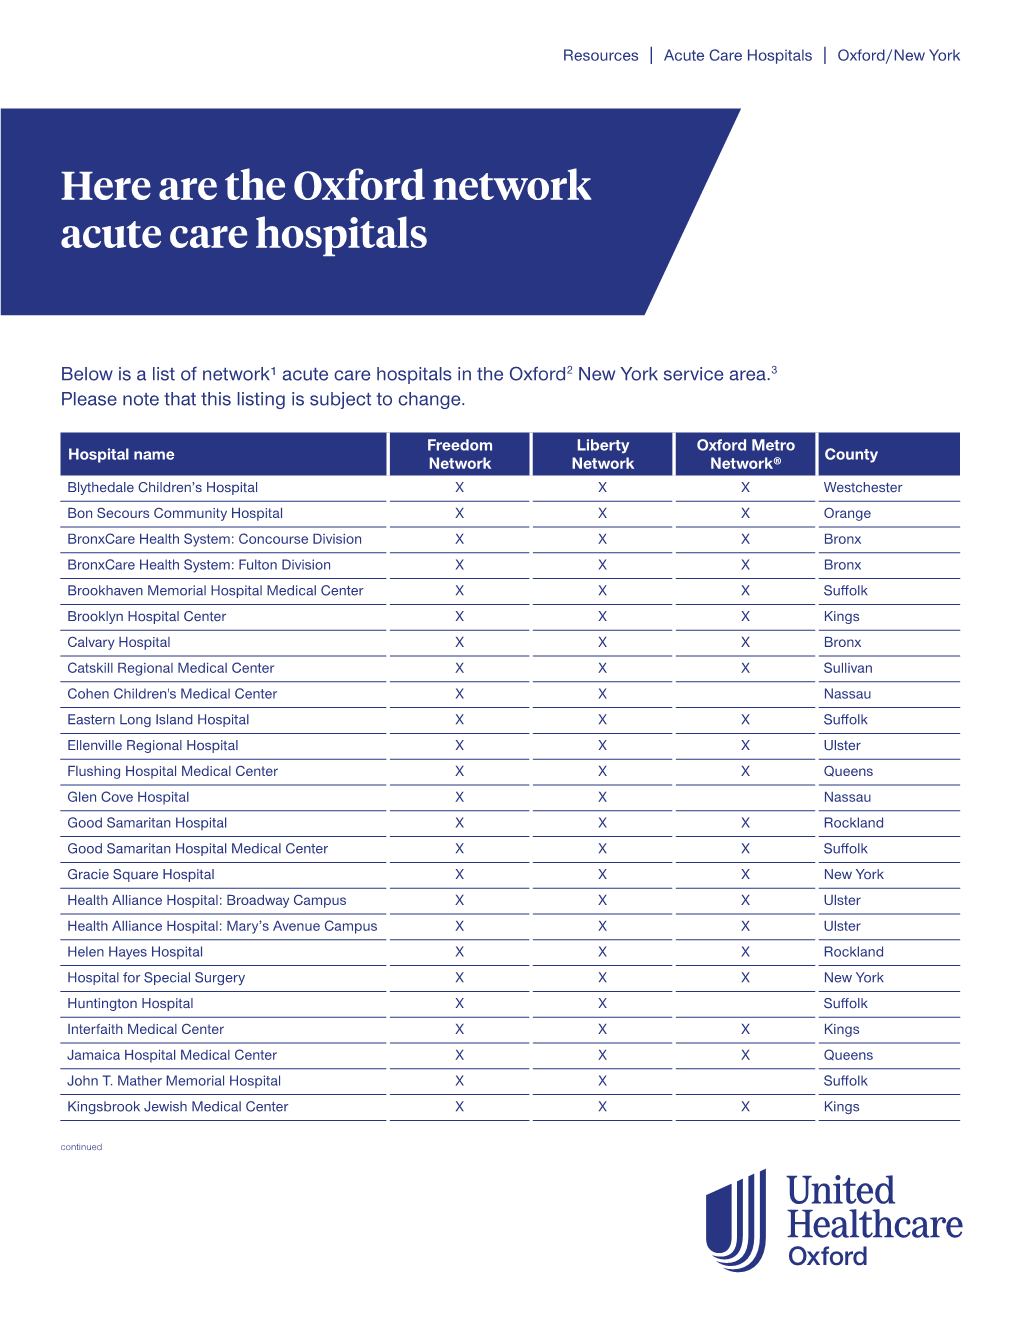 Here Are the Oxford Network Acute Care Hospitals